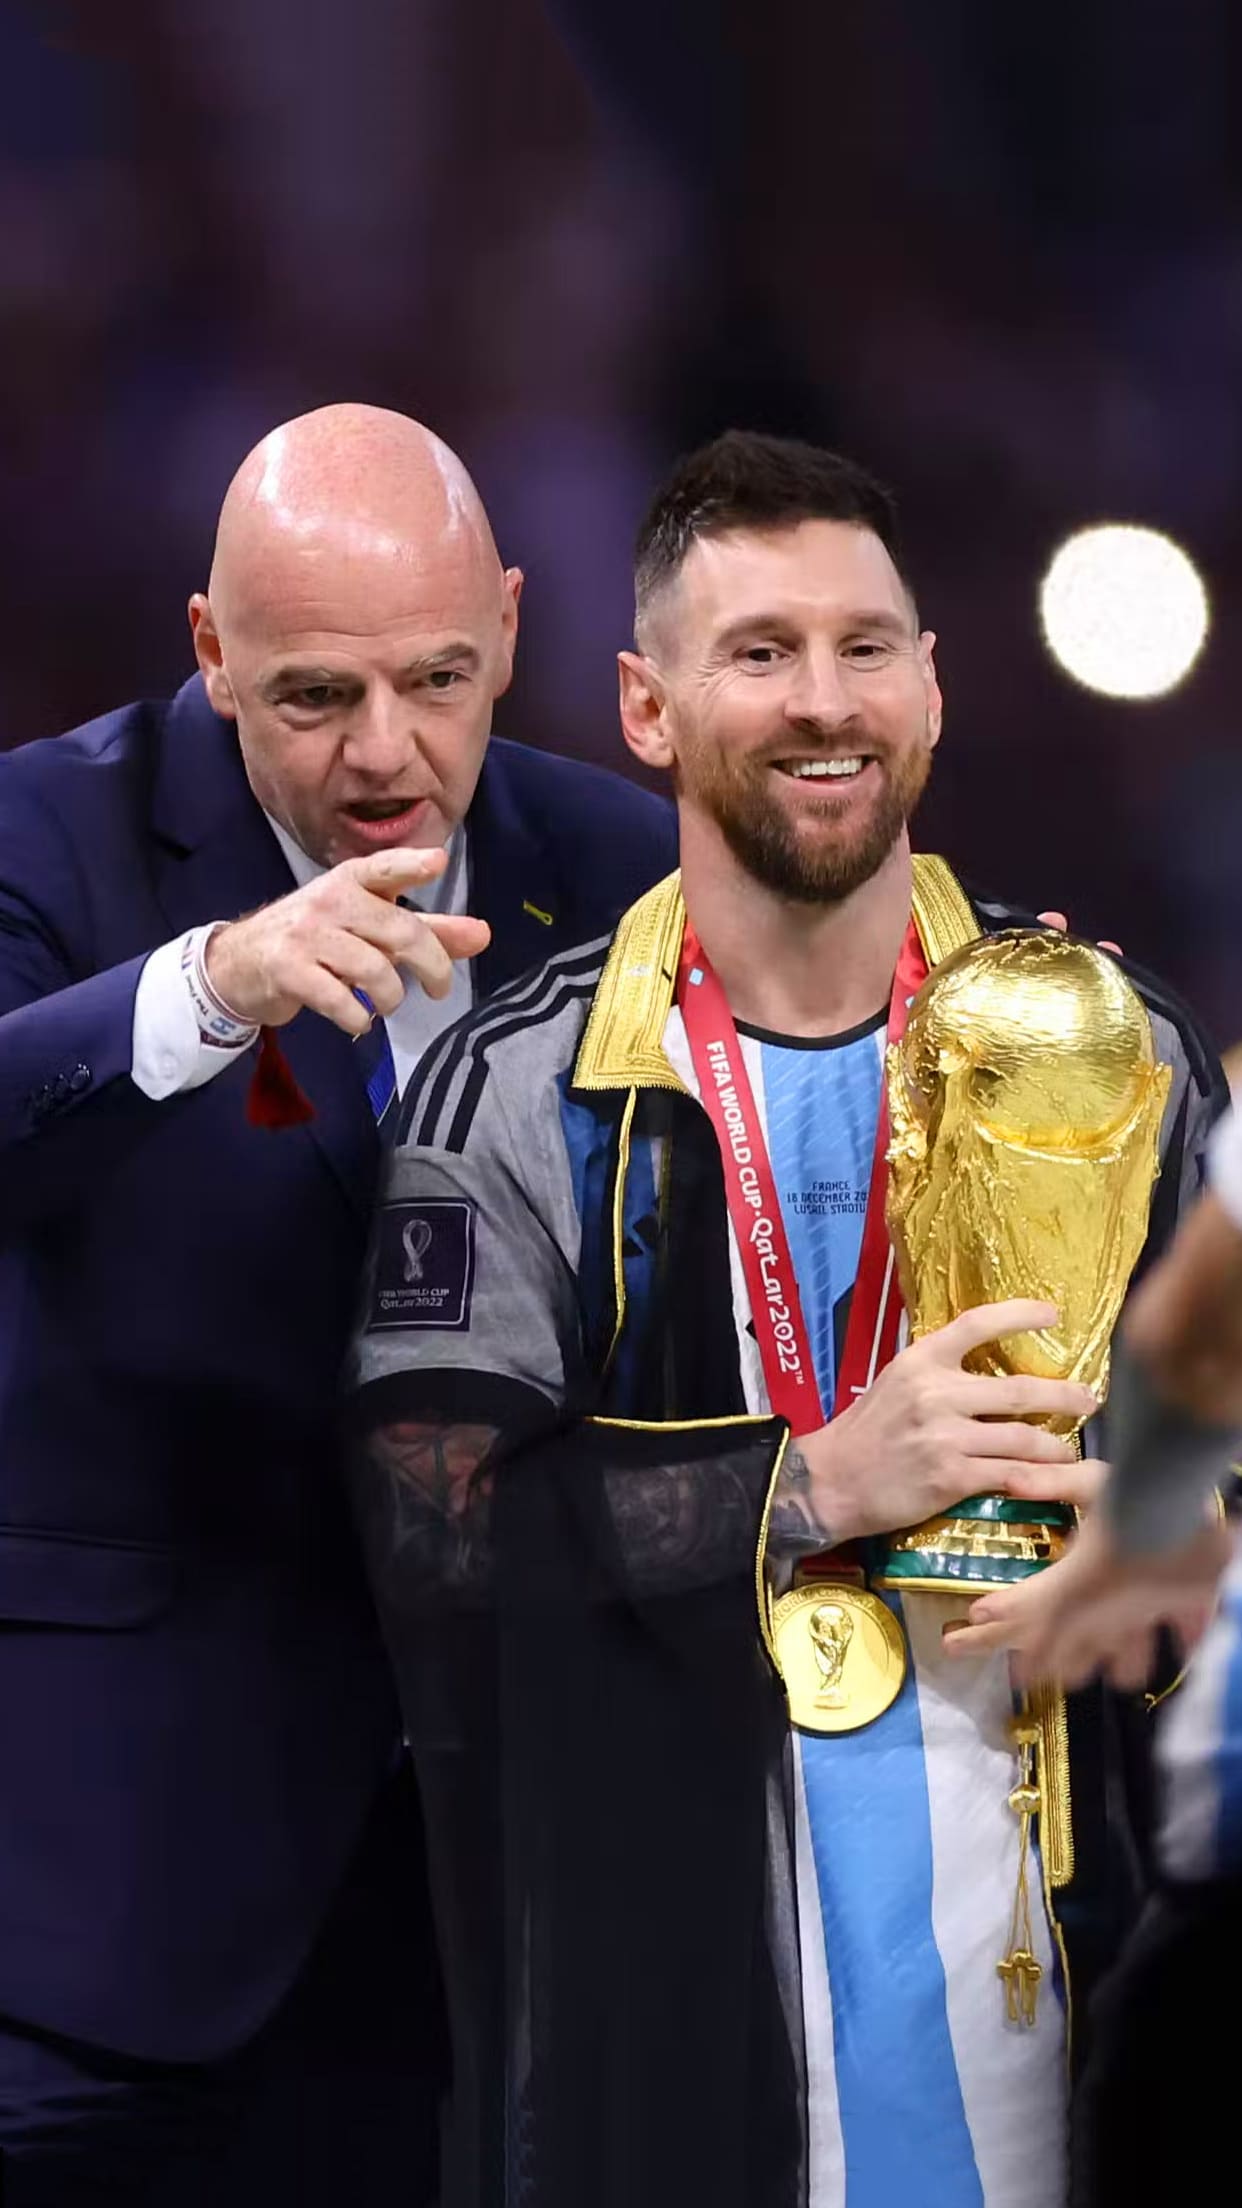 Instagram Photo of Lionel Messi Holding World Cup Trophy Is Now the  MostLiked Ever Beating Image of an Egg